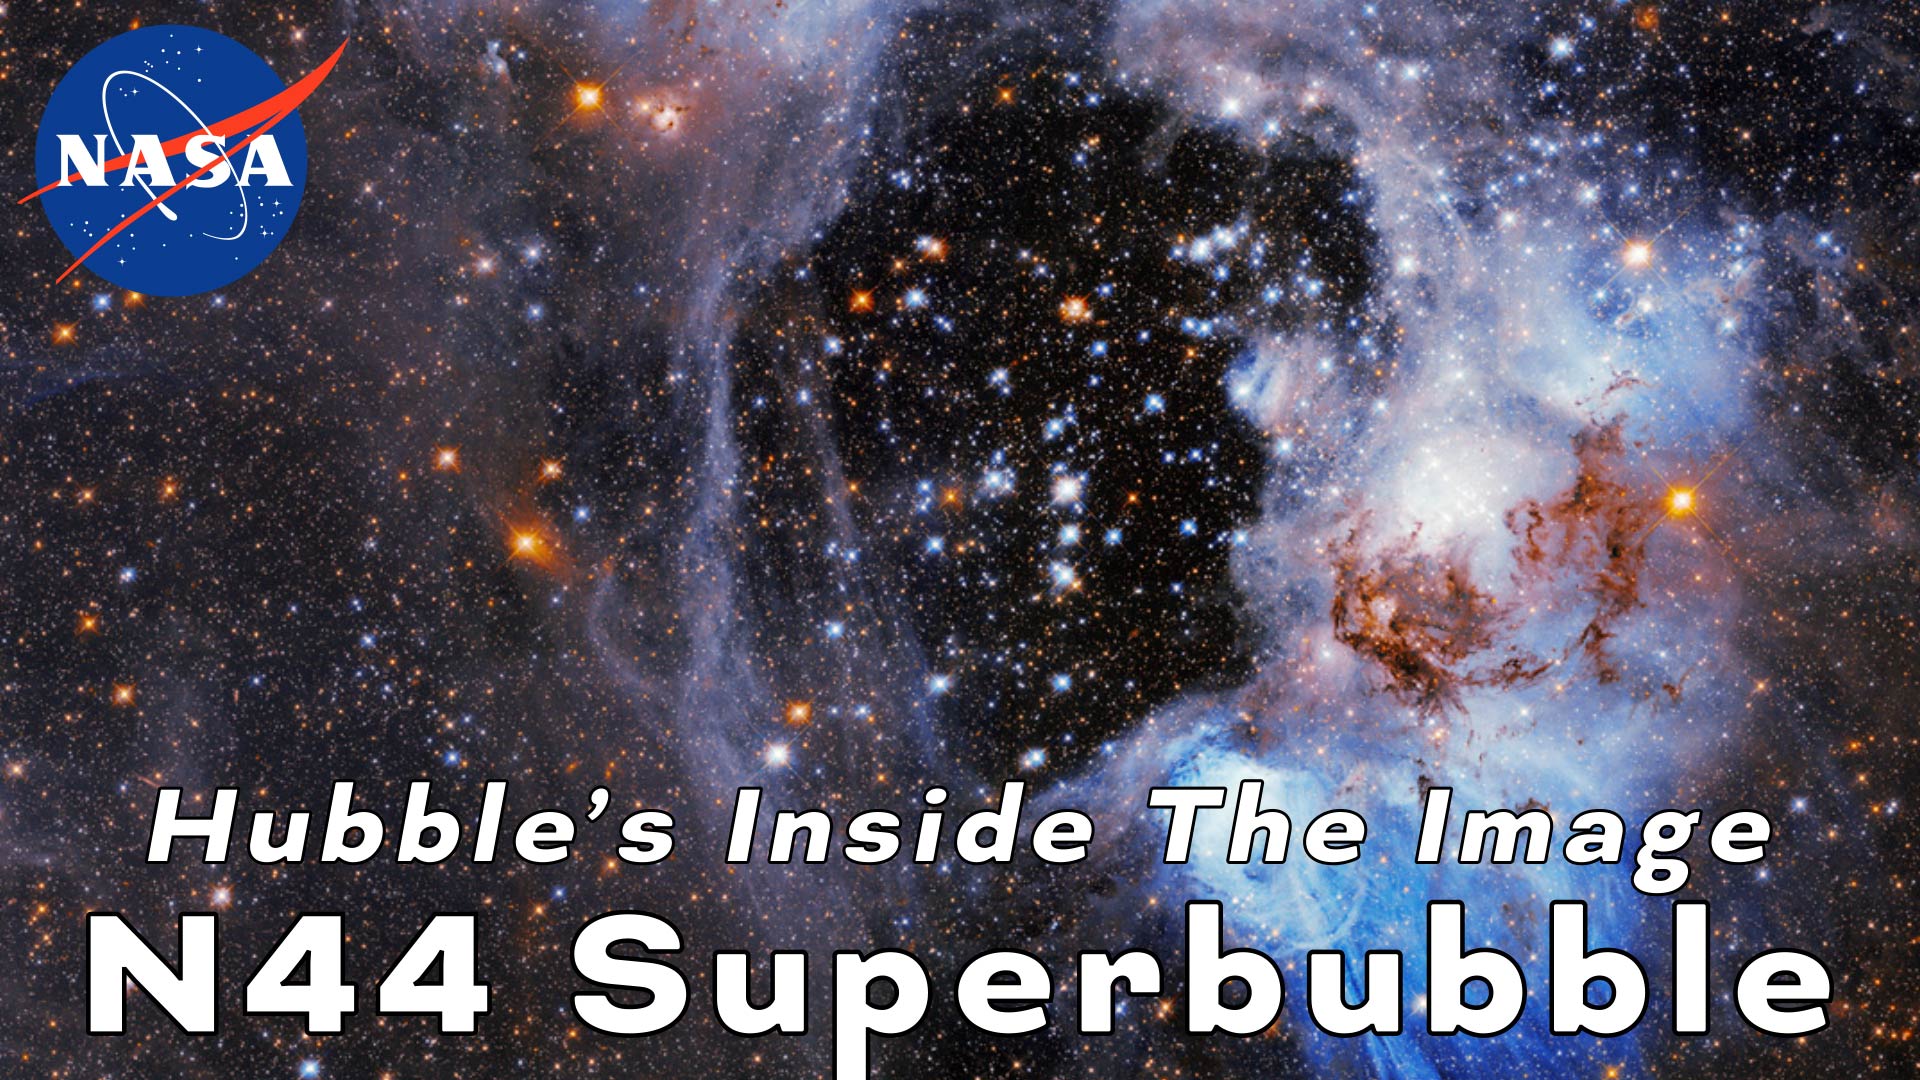 Preview Image for Hubble’s Inside The Image: N44 Superbubble